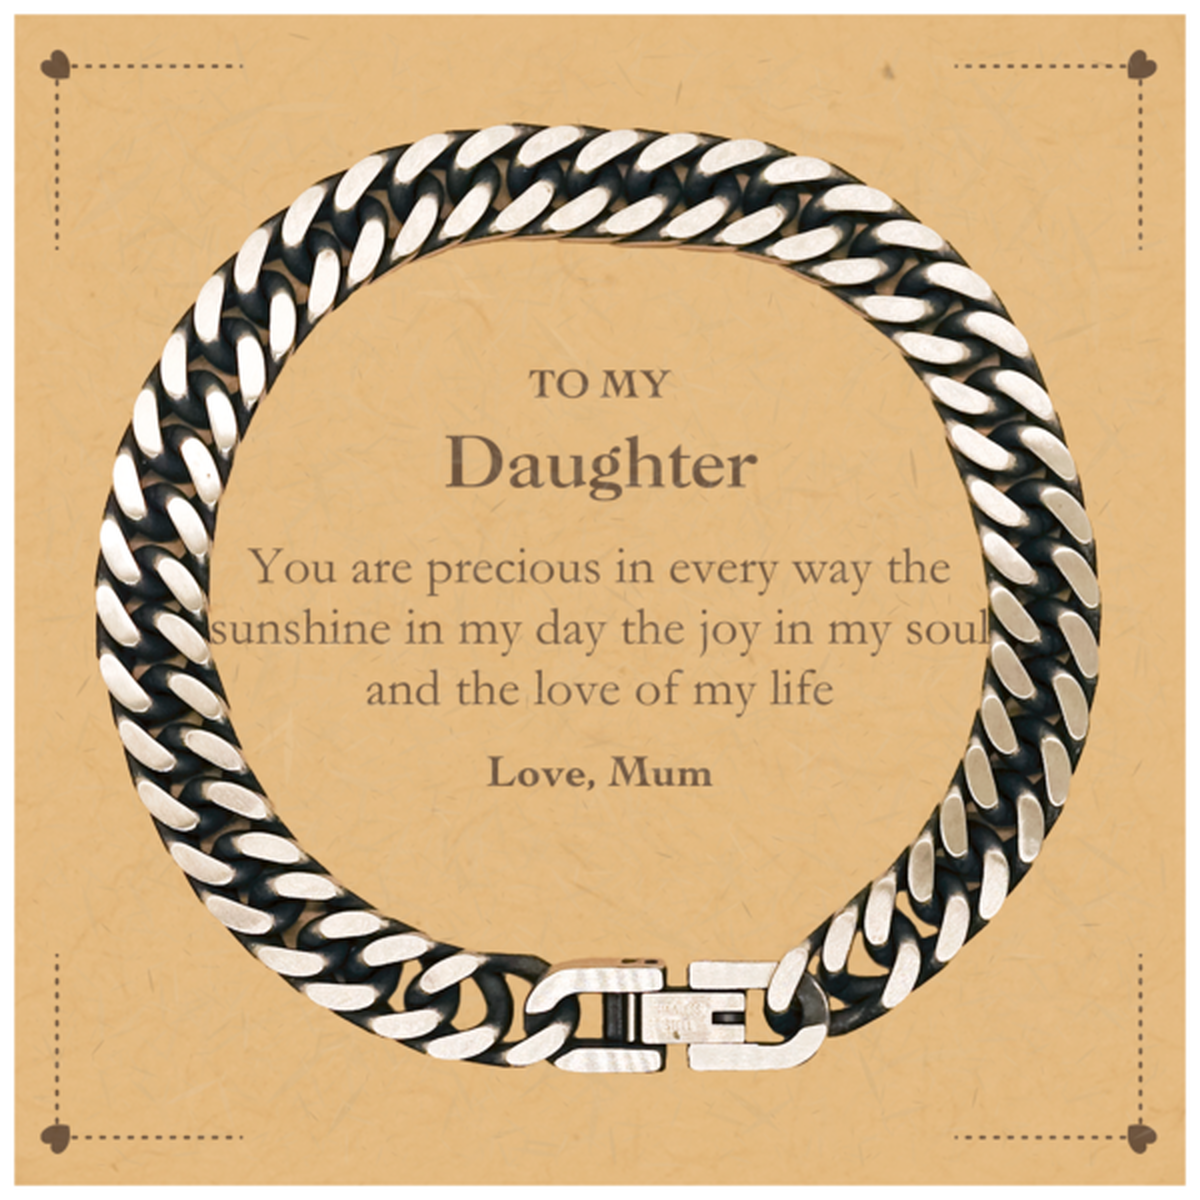 Graduation Gifts for Daughter Cuban Link Chain Bracelet Present from Mum, Christmas Daughter Birthday Gifts Daughter You are precious in every way the sunshine in my day. Love, Mum